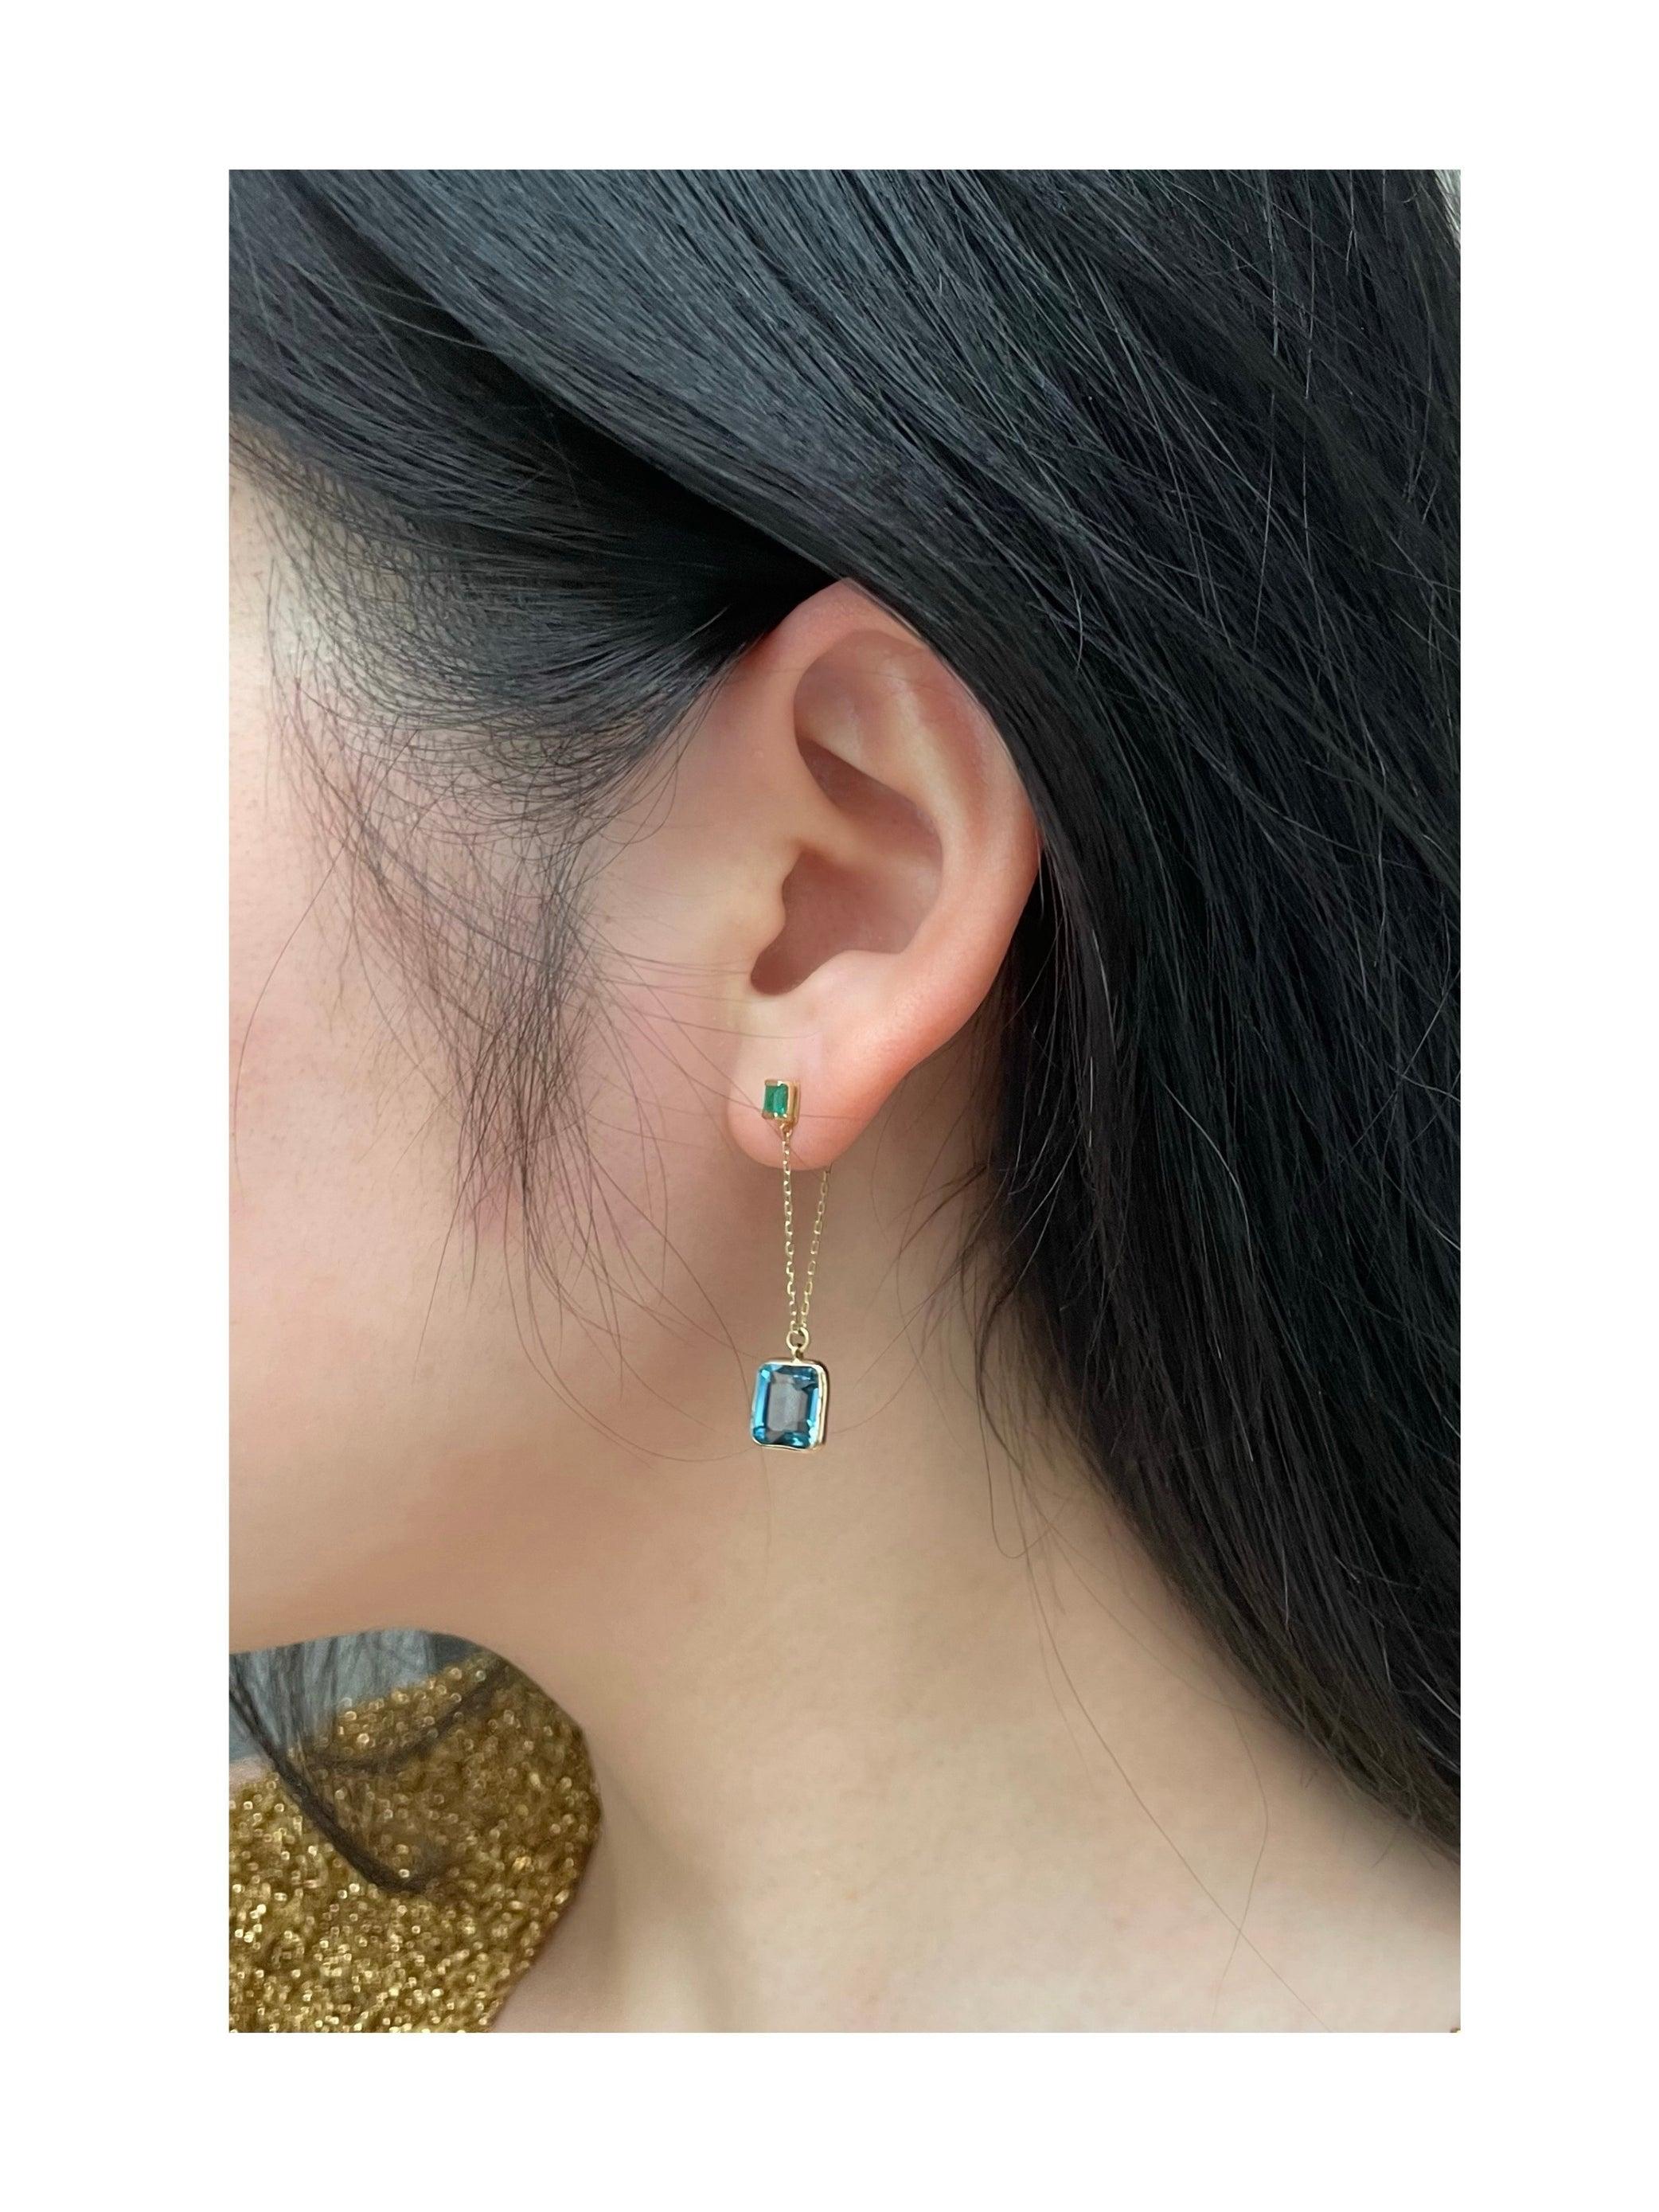 These beautifully handcrafted earrings are classics from our collections. An elegant and modern colour combination of Emerald and London Blue Topaz will surely enchant you. This pair perfectly exudes our modern and whimsical aesthetic. Measuring